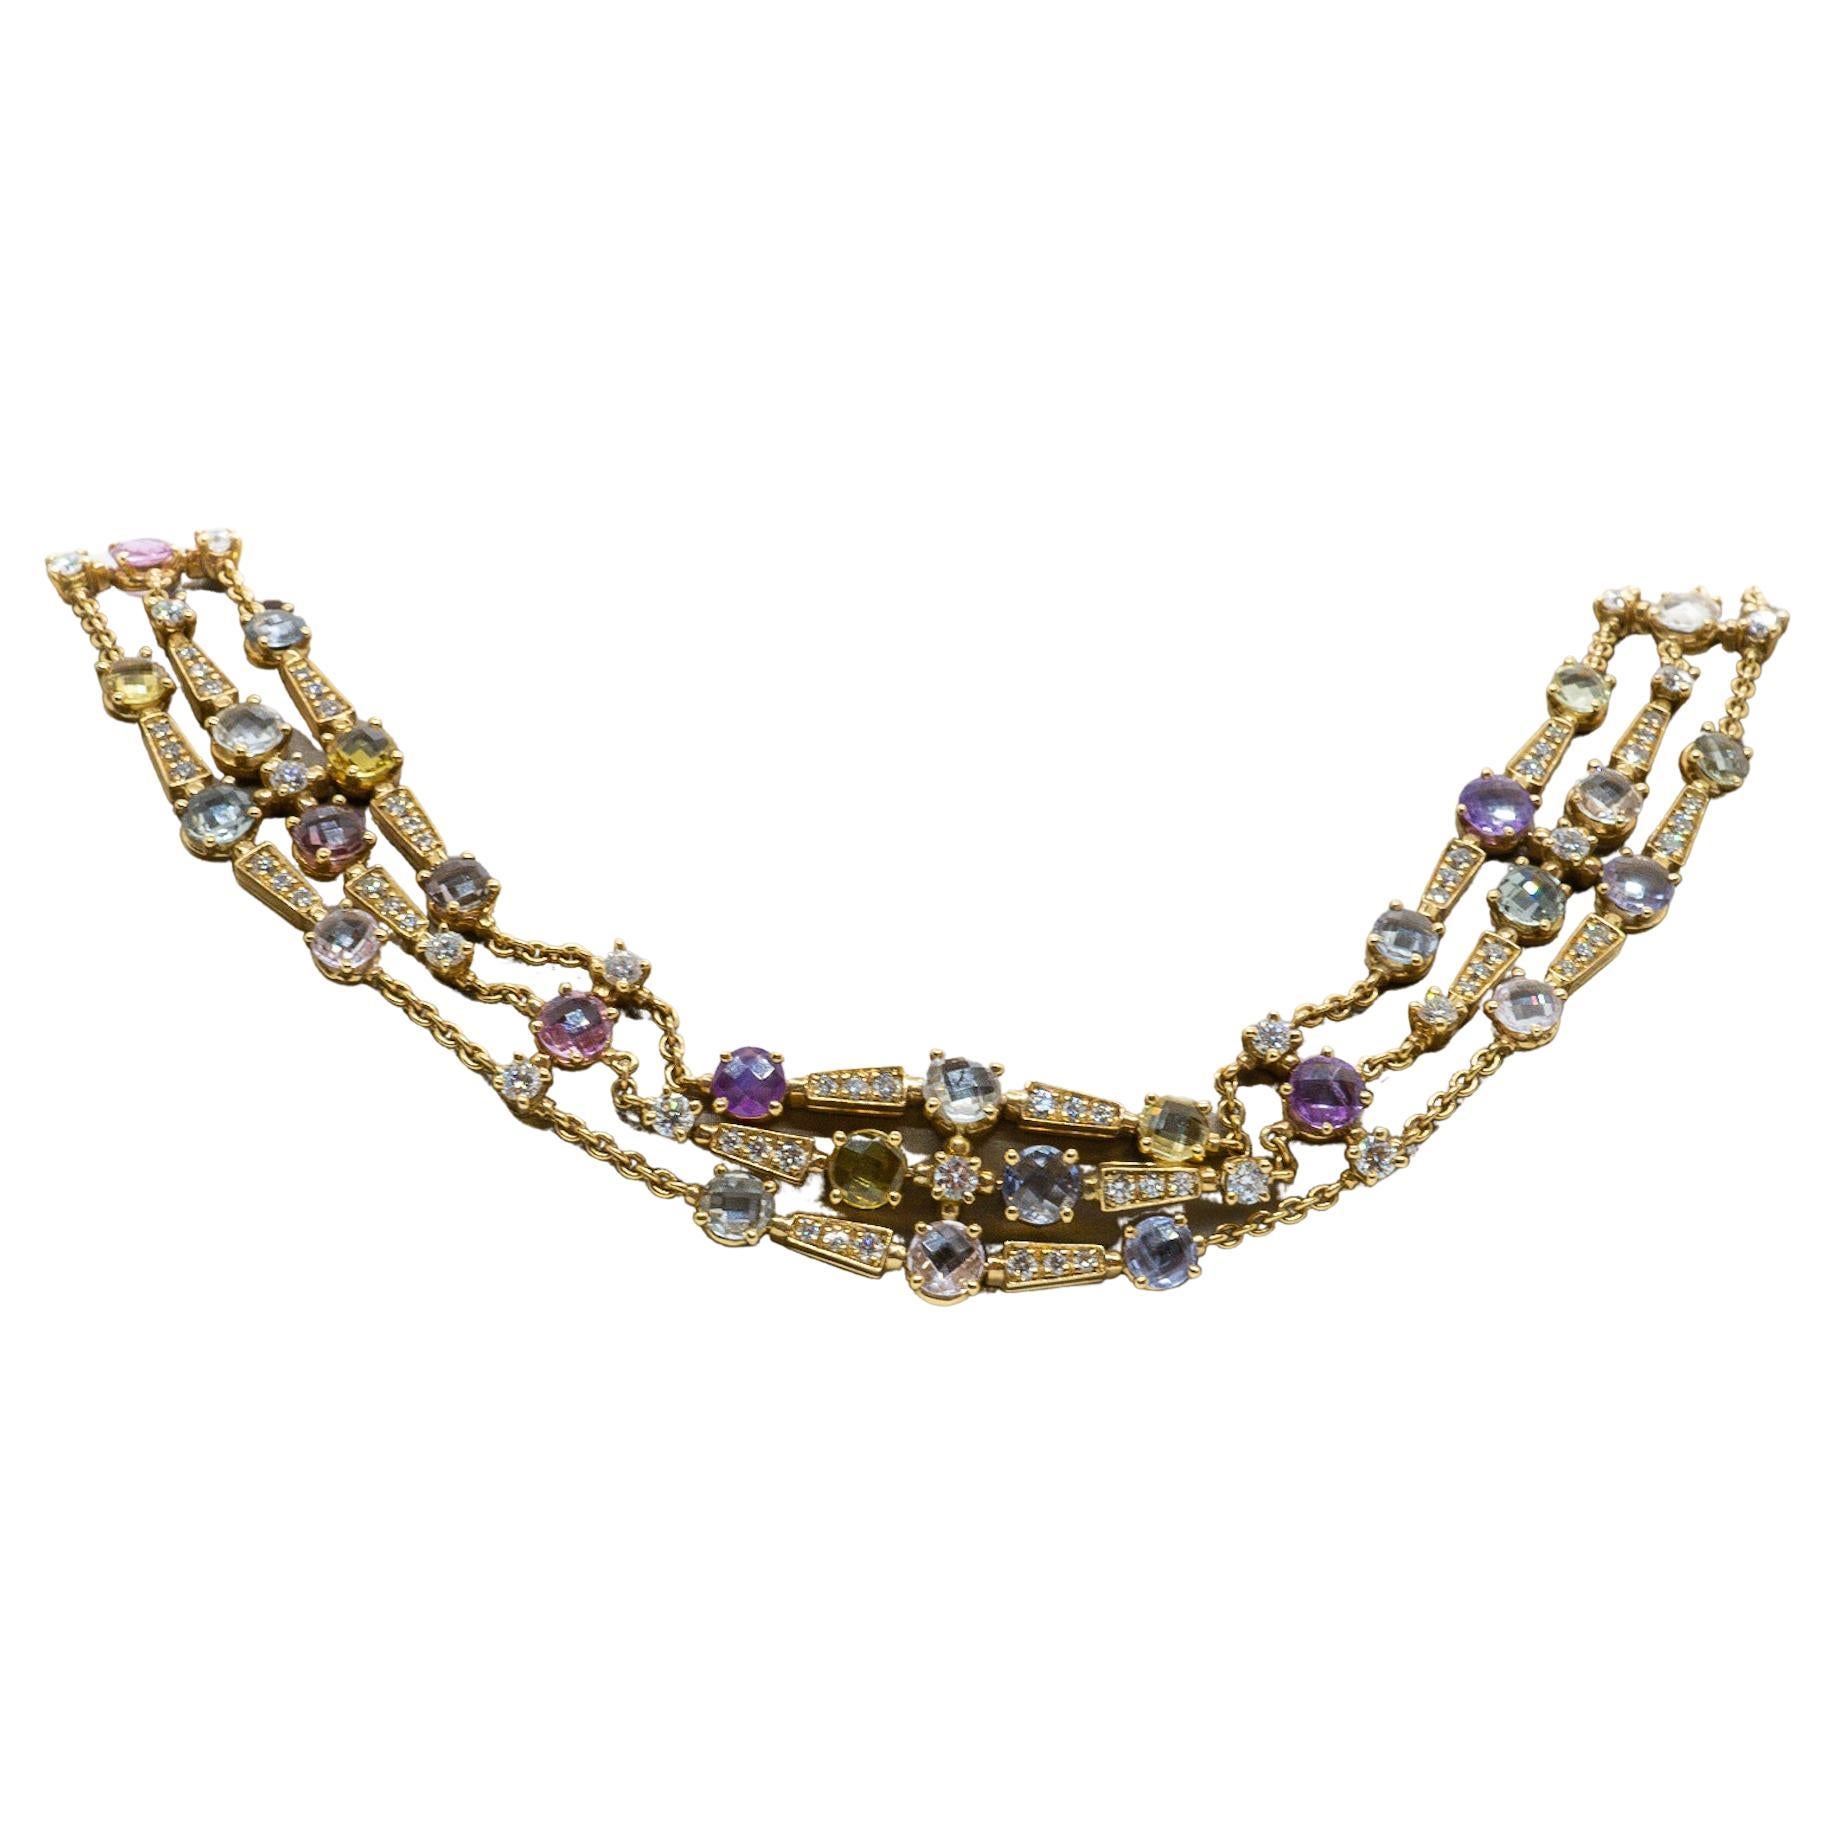 This exquisite necklace is a true masterpiece of fine jewellery. Crafted from 18k yellow gold, it features a stunning array of different colored sapphires, totaling an impressive 18.4 carats. The sapphires are beautifully arranged in a way that